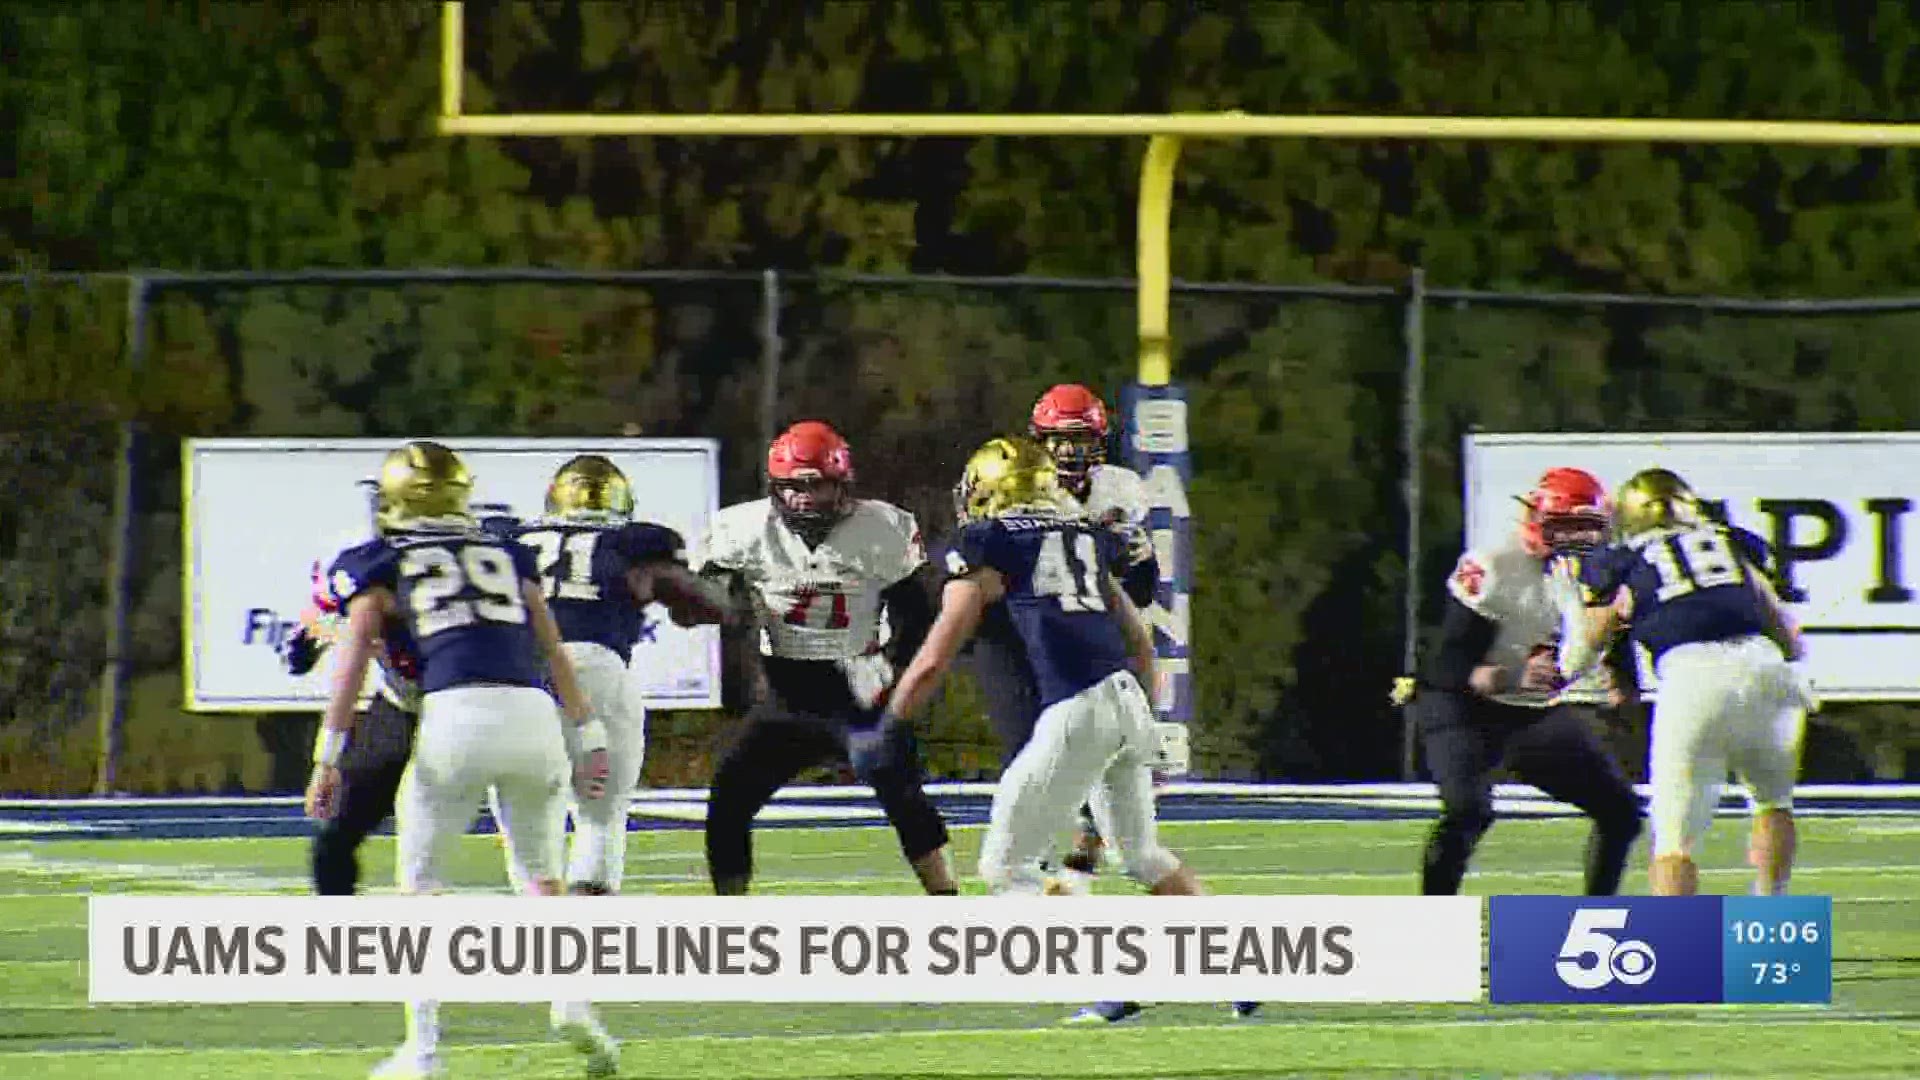 UAMS releases new COVID-19 guidelines for sports teams